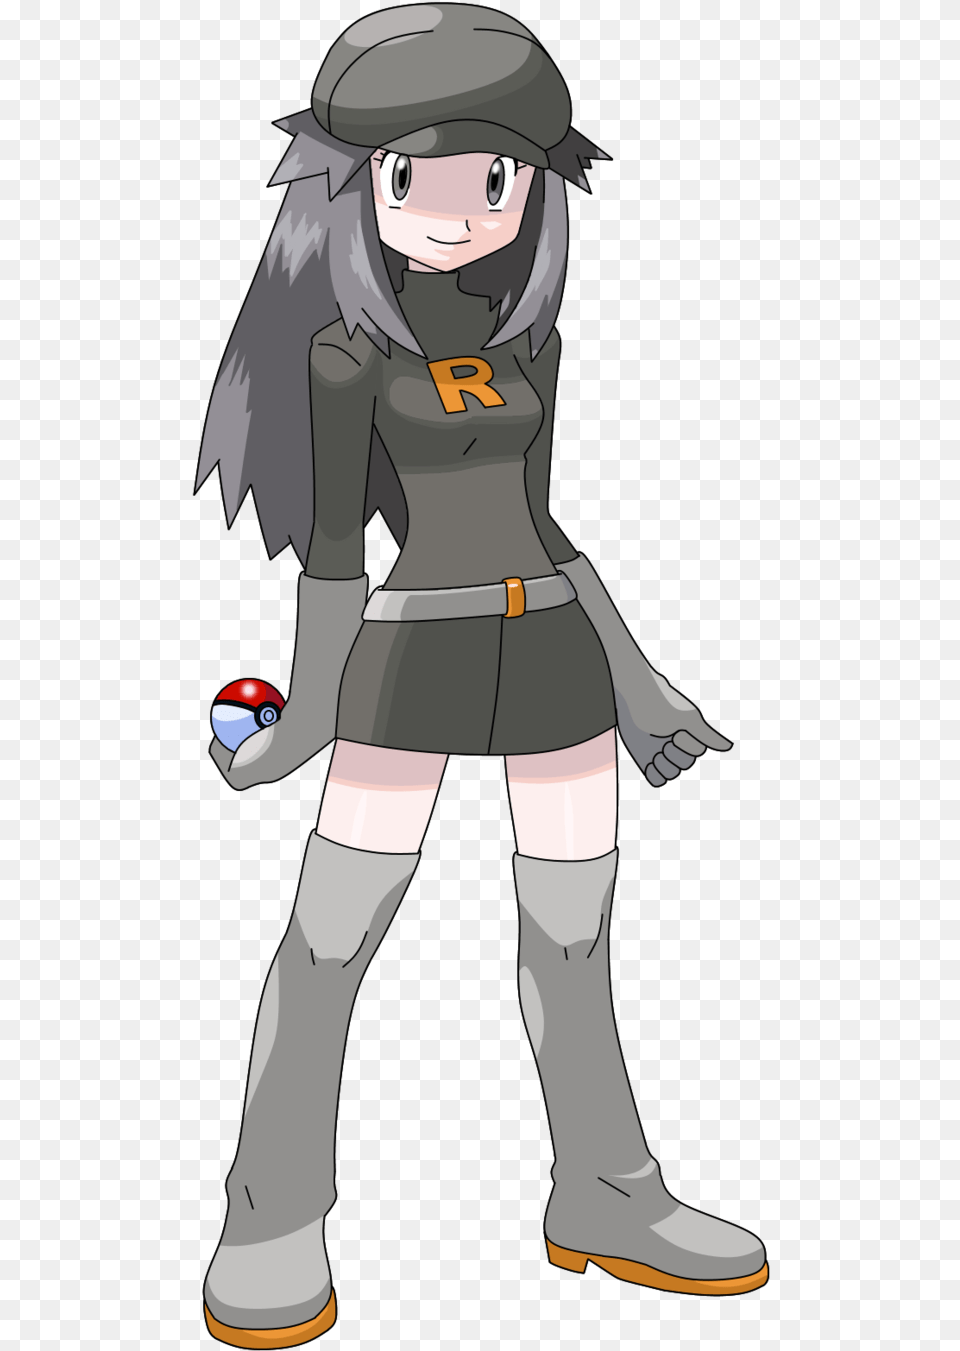 Leaf Team Rocket Outfit By Morki95 Pokemon Team Rocket Outfit, Book, Comics, Publication, Person Png Image